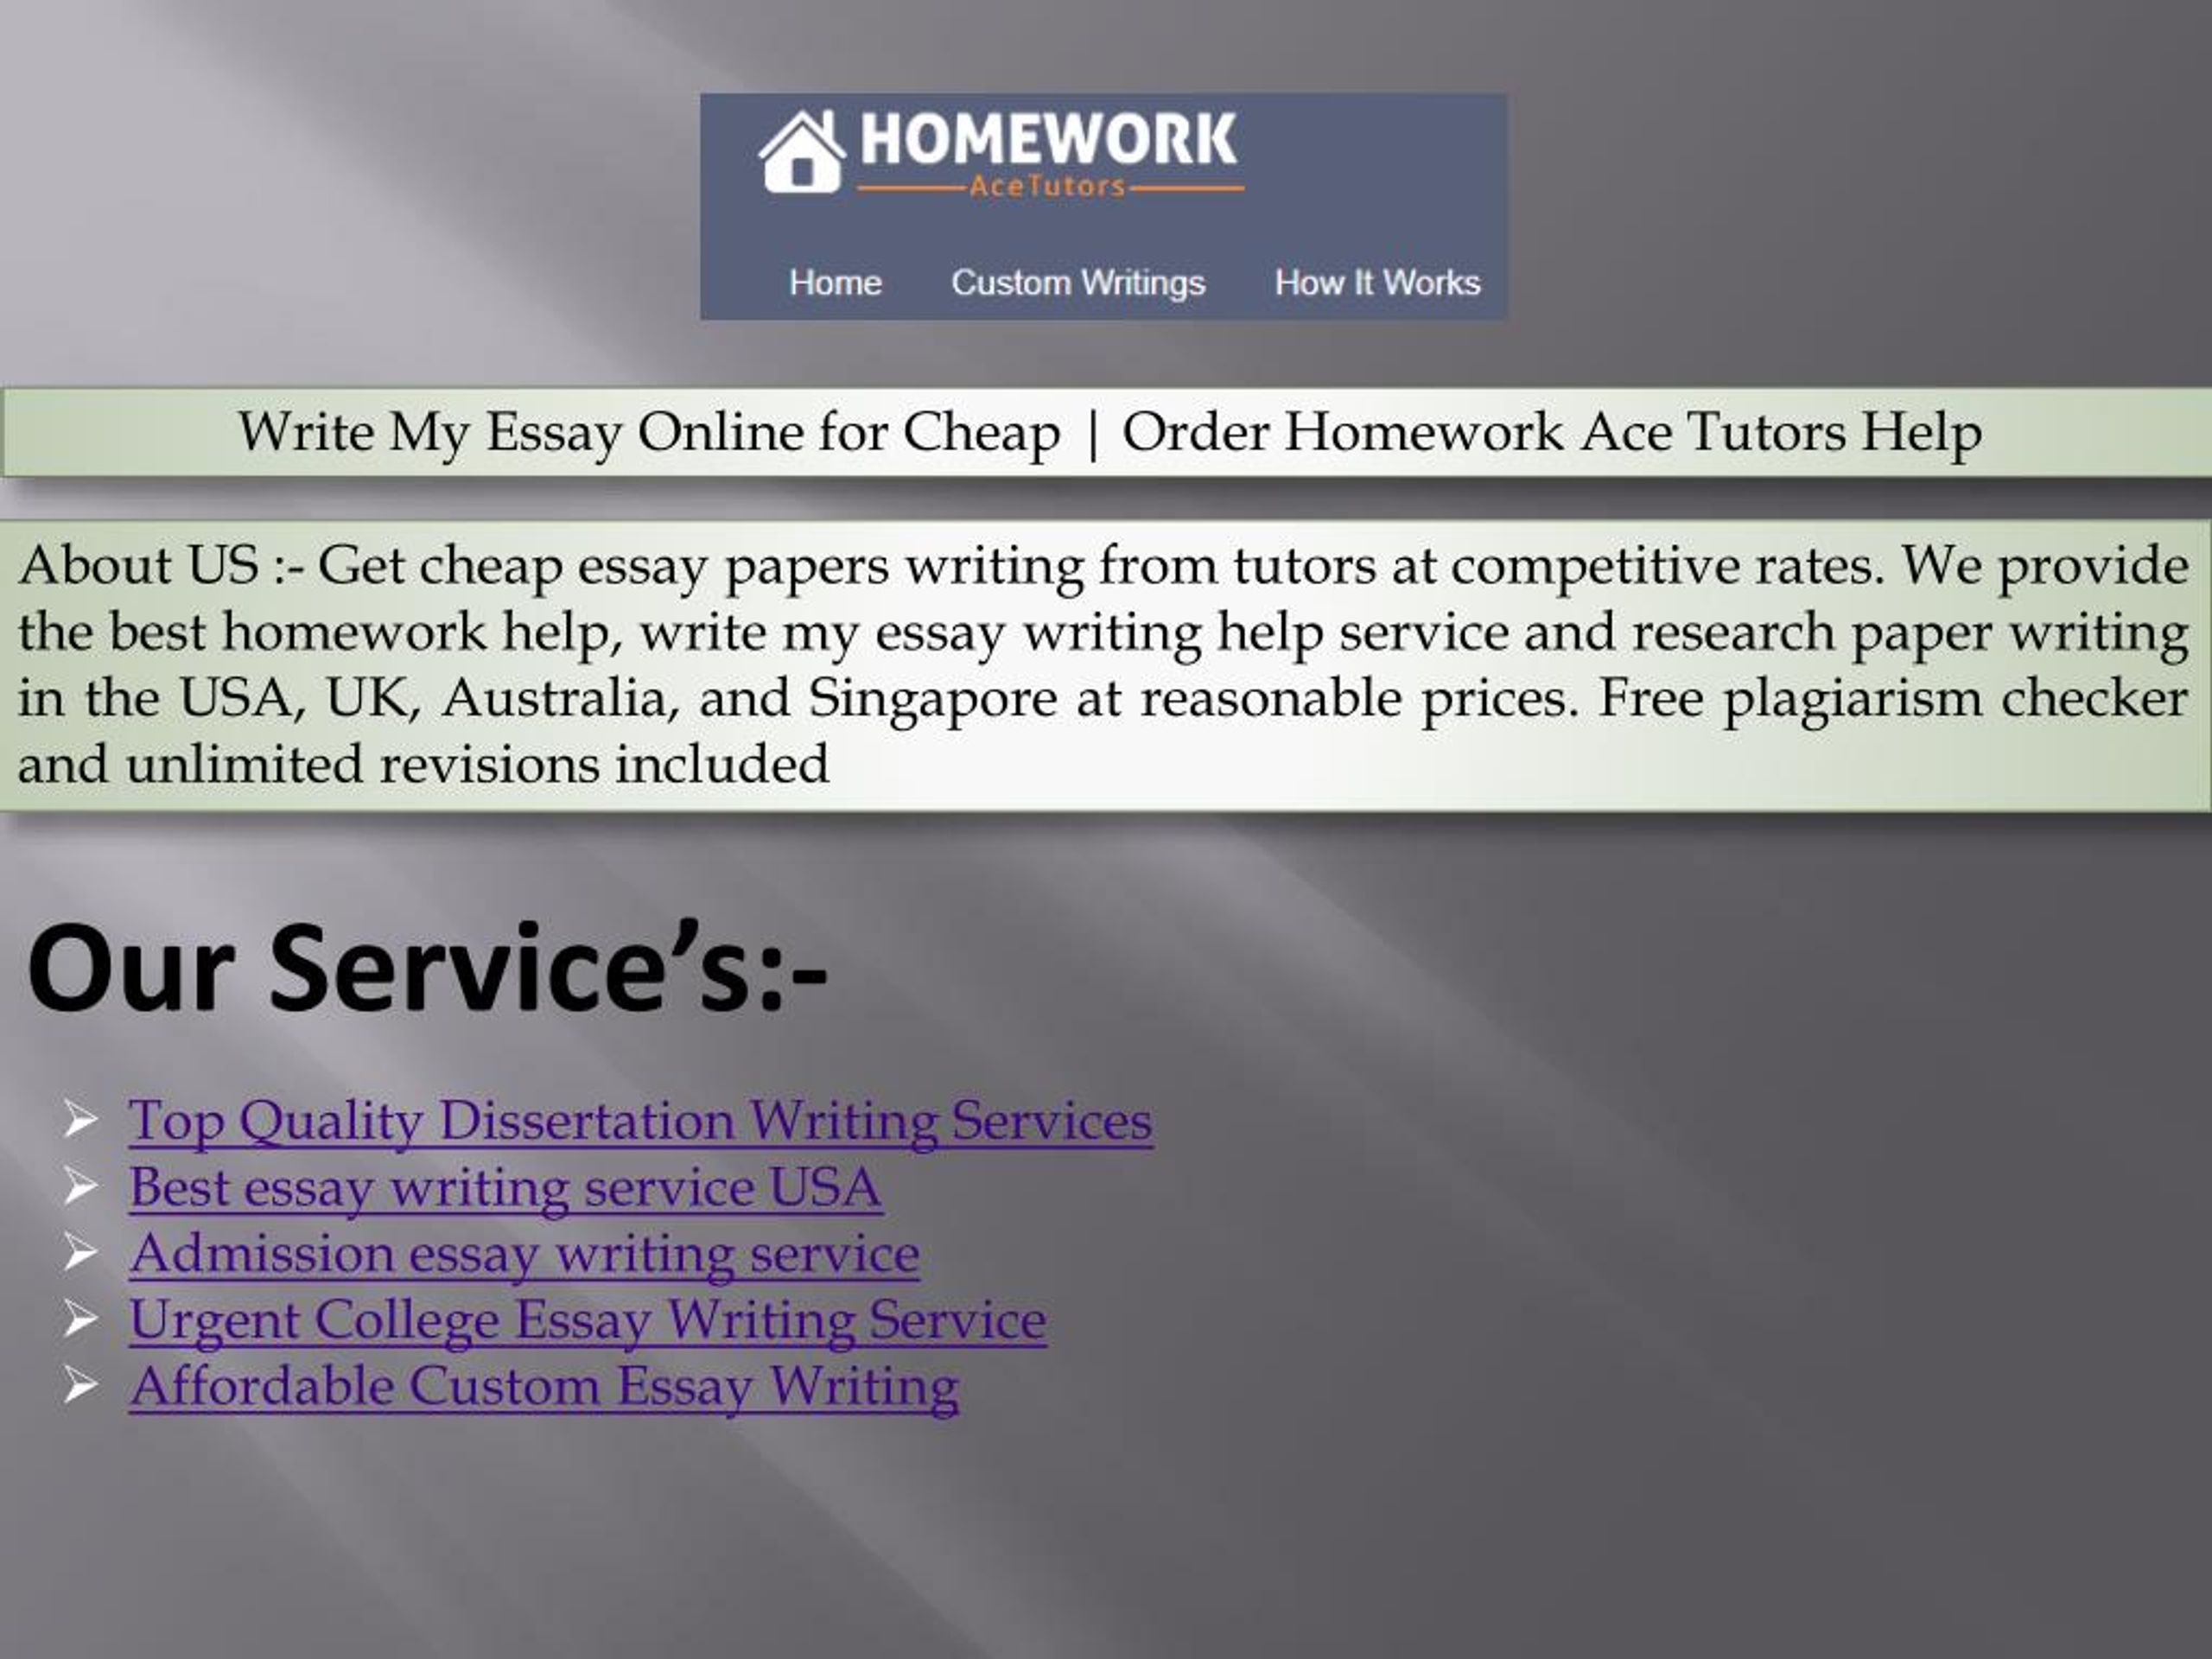 Why Are We A Cheap Research Paper Writing Service?